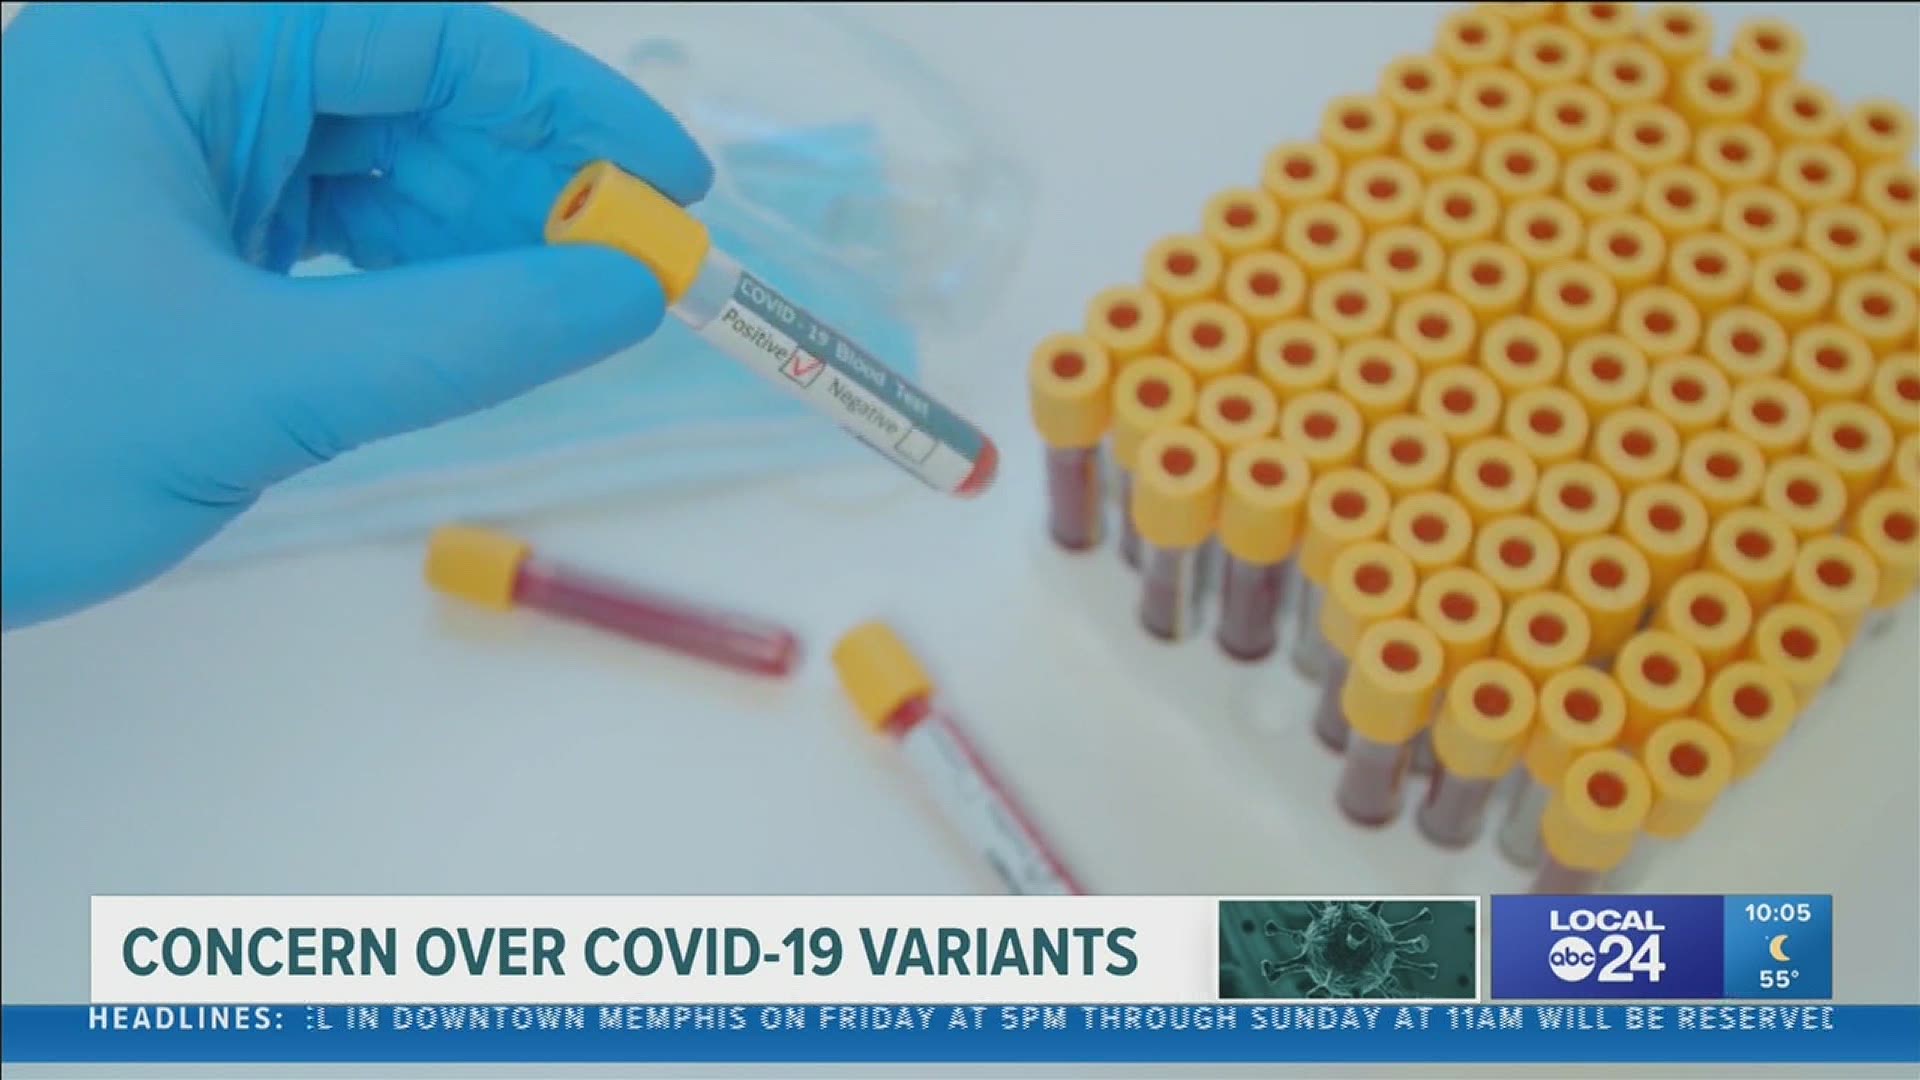 “It certainly is more contagious. The good news about that variant is that the vaccines are still very effective against it,” said Dr. Steve Threlkeld.